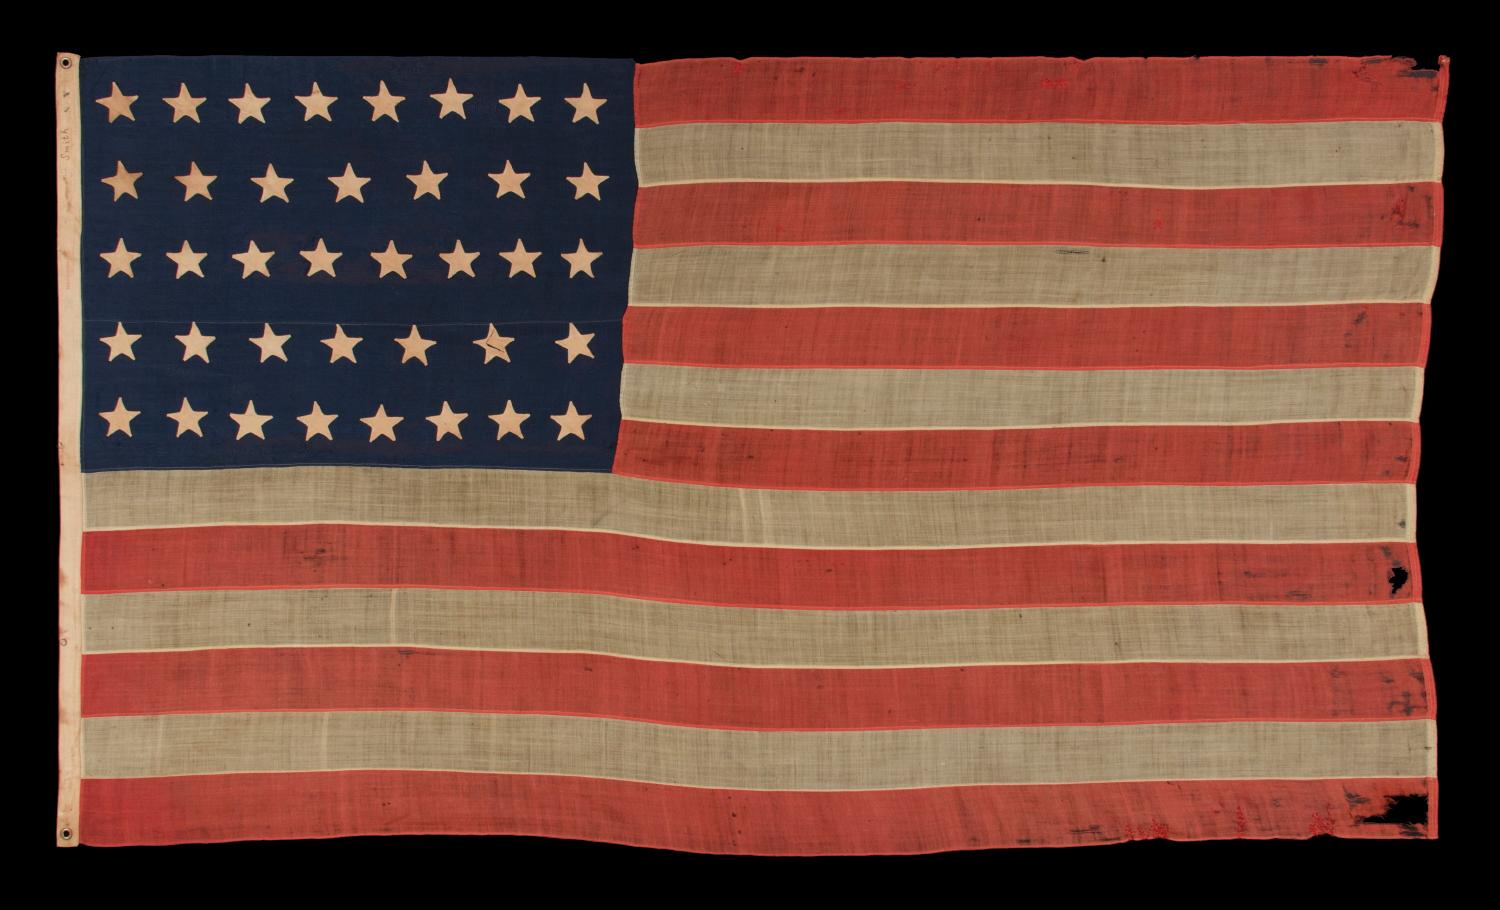 38 HAND-SEWN, SINGLE-APPLIQUÉD STARS ON AN ANTIQUE AMERICAN FLAG MADE AT THE TIME WHEN COLORADO WAS THE MOST RECENT STATE TO JOIN THE UNION, 1876-1889, FORMERLY PART OF THE MASTAI COLLECTION: 

38 star American national flag with important